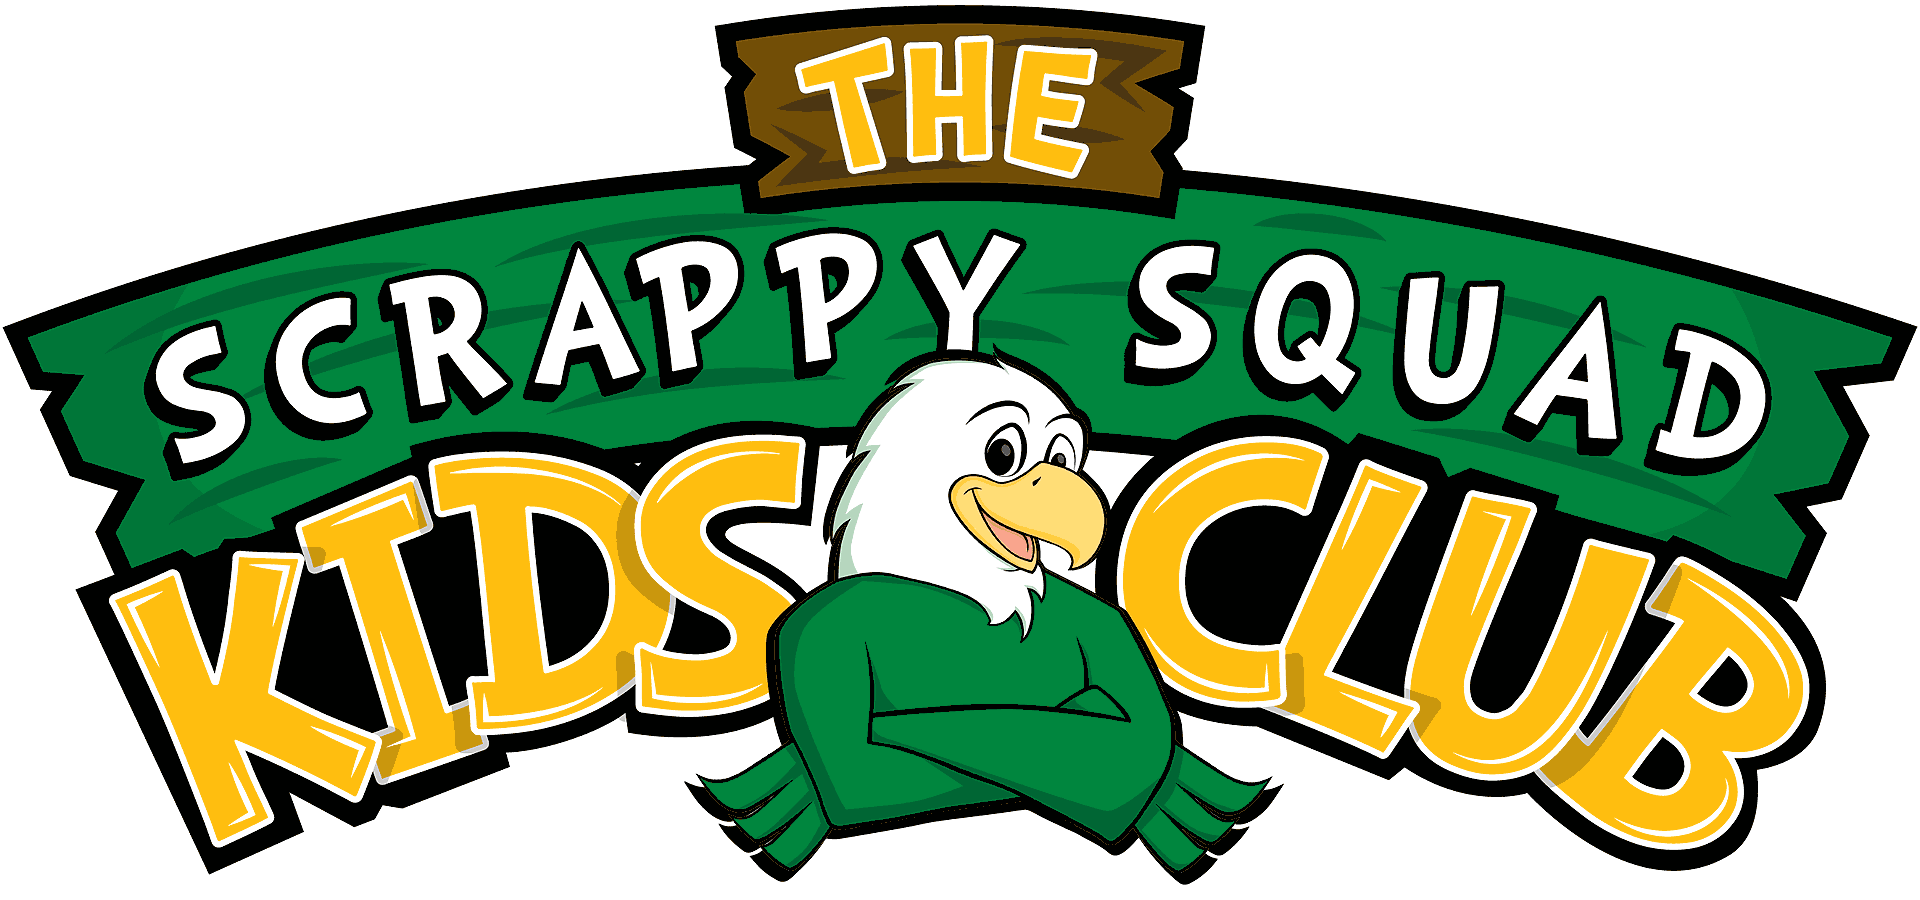 Join The Scrappy Squad!